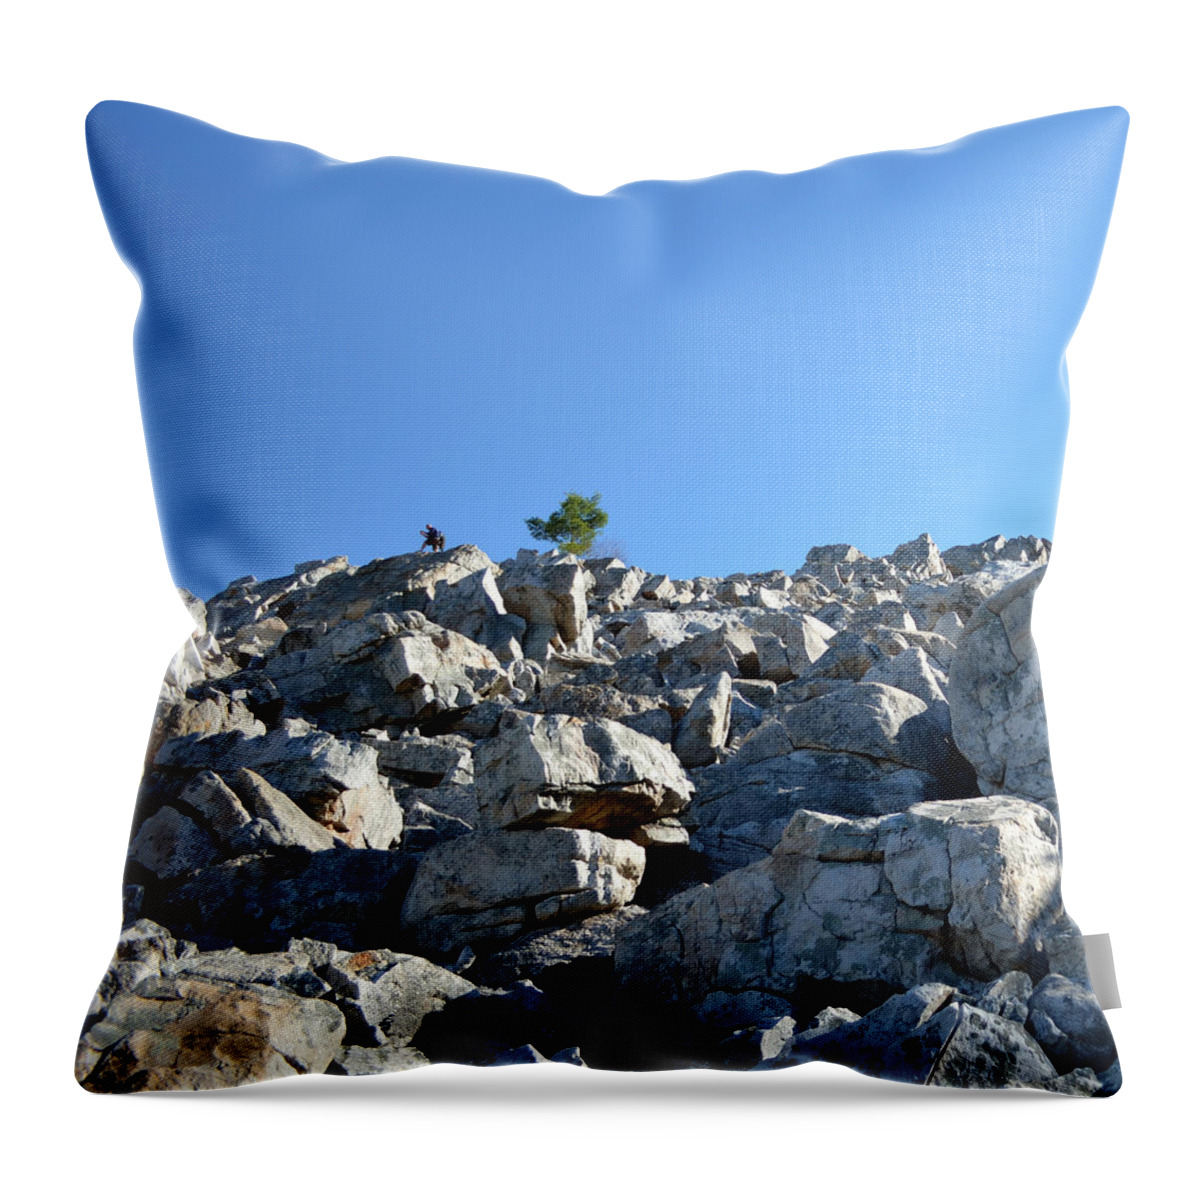 Devil's Marble Yard Throw Pillow featuring the photograph Solitude At Devils Marble Yard by Cathy Shiflett